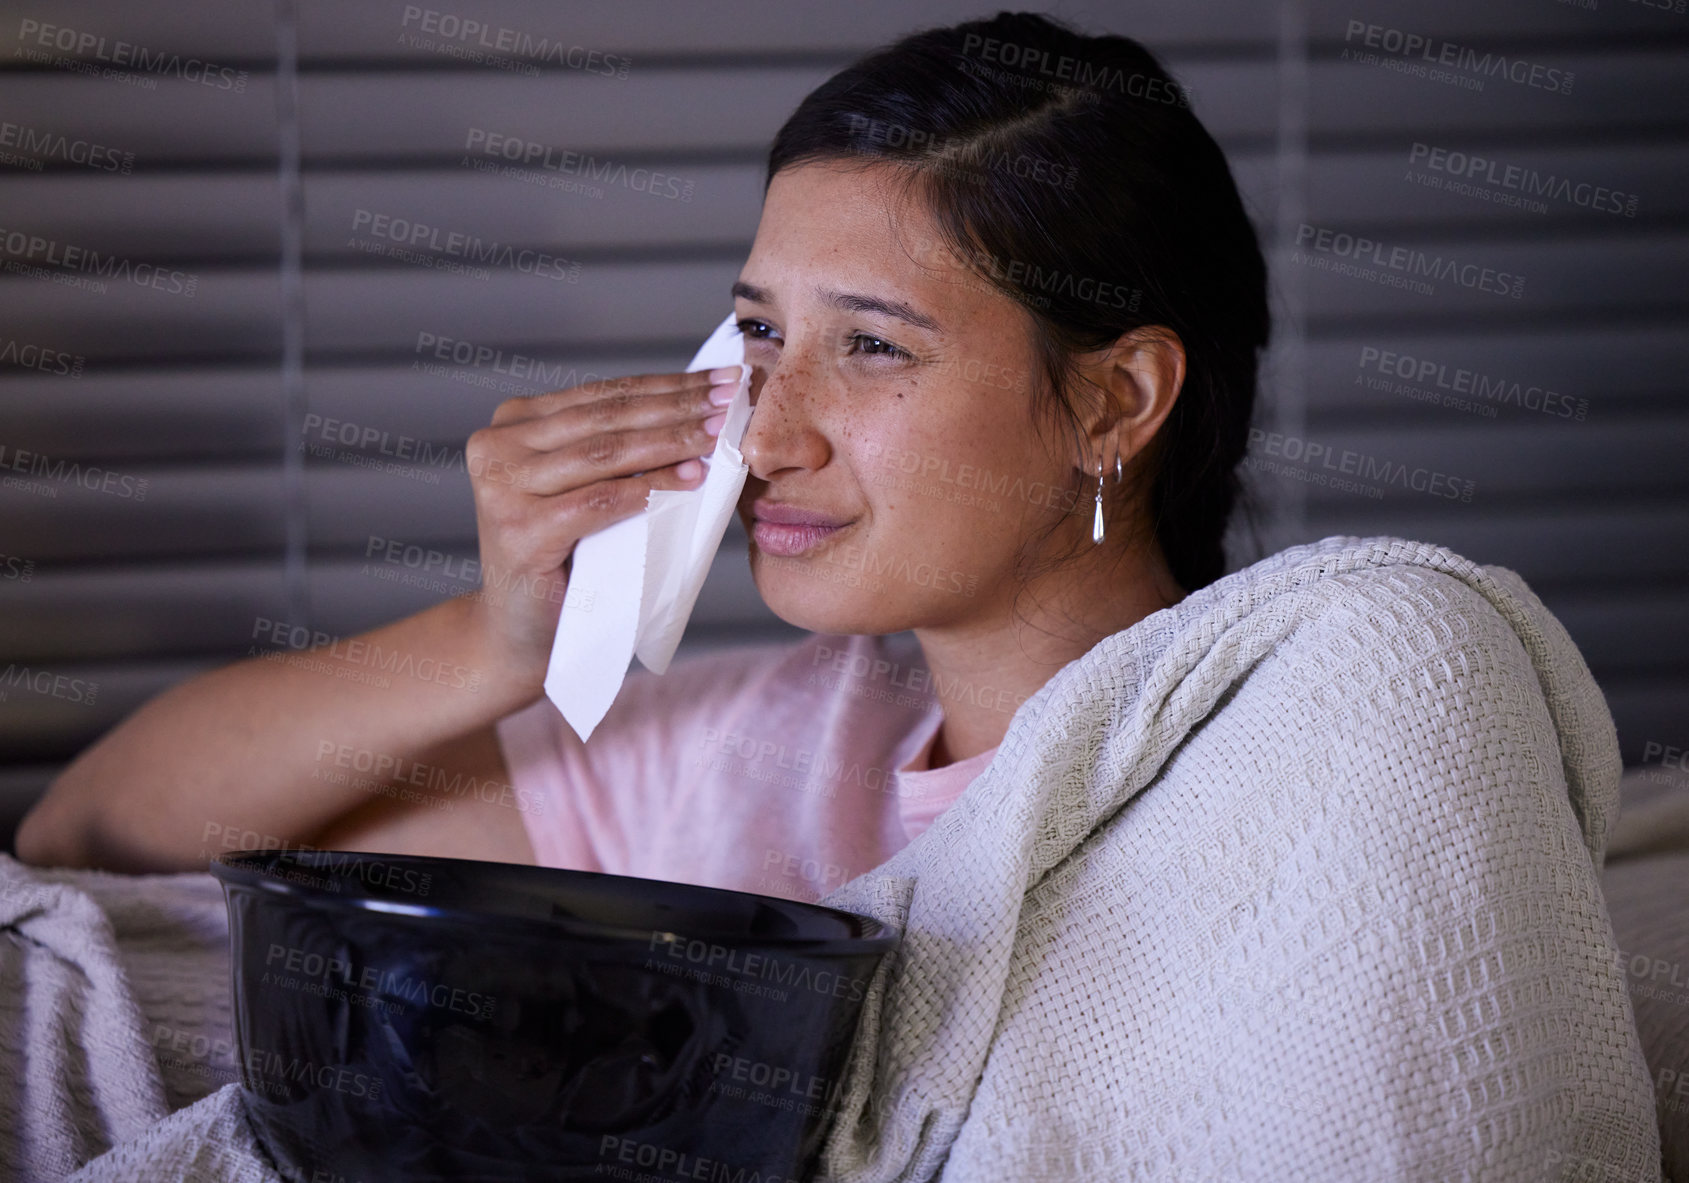 Buy stock photo Shot of a young woman crying while watching tv at home